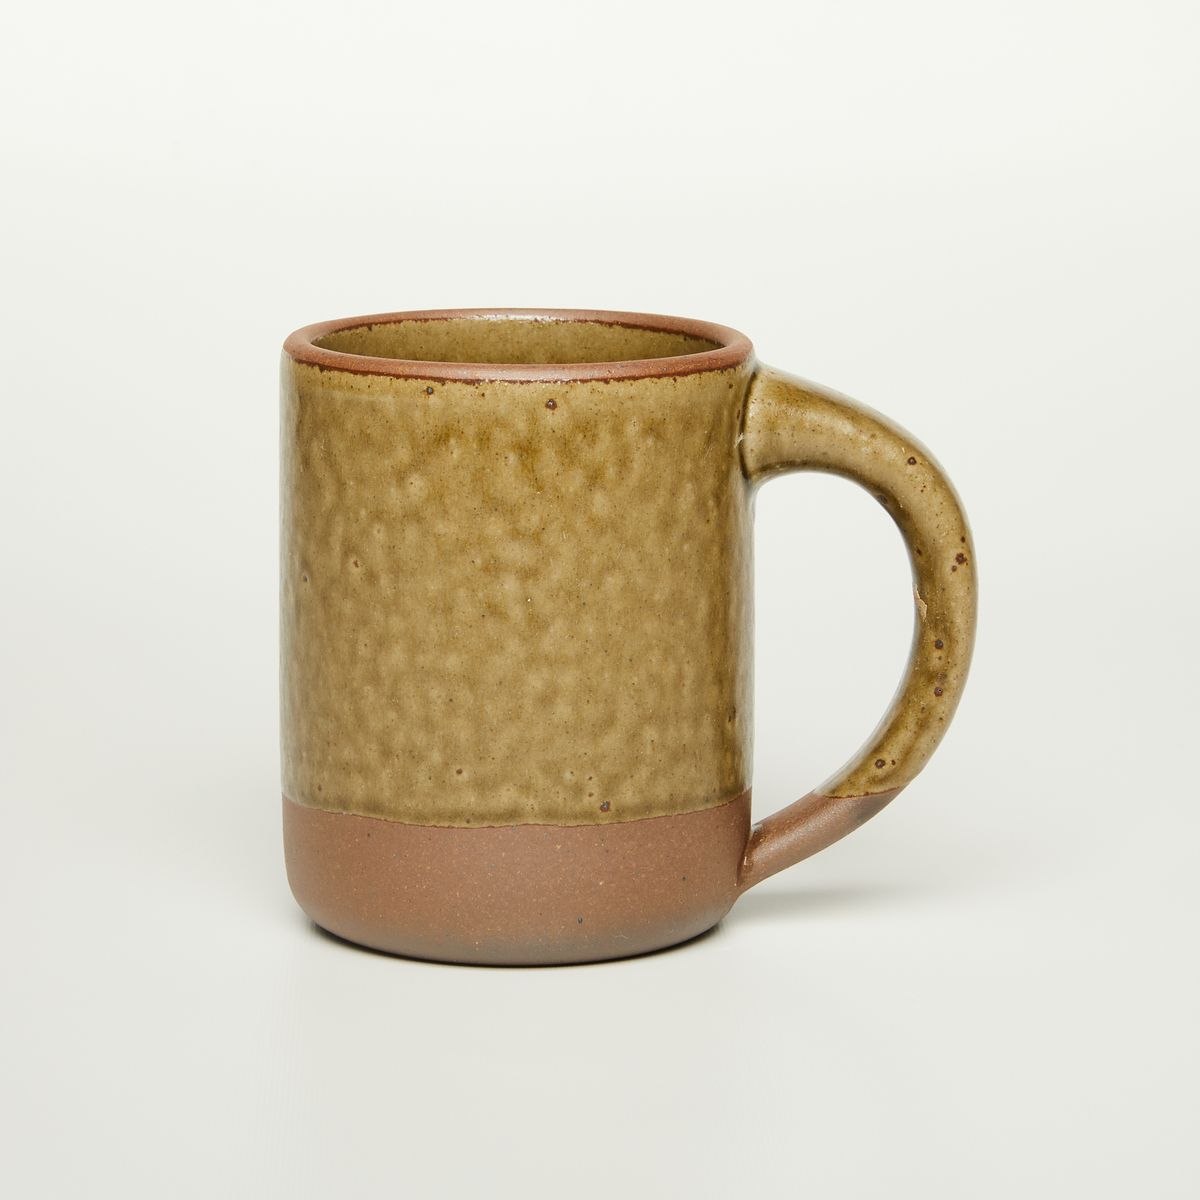 A big sized ceramic mug with handle in an earthy green and brown color featuring iron speckles and unglazed rim and bottom base.